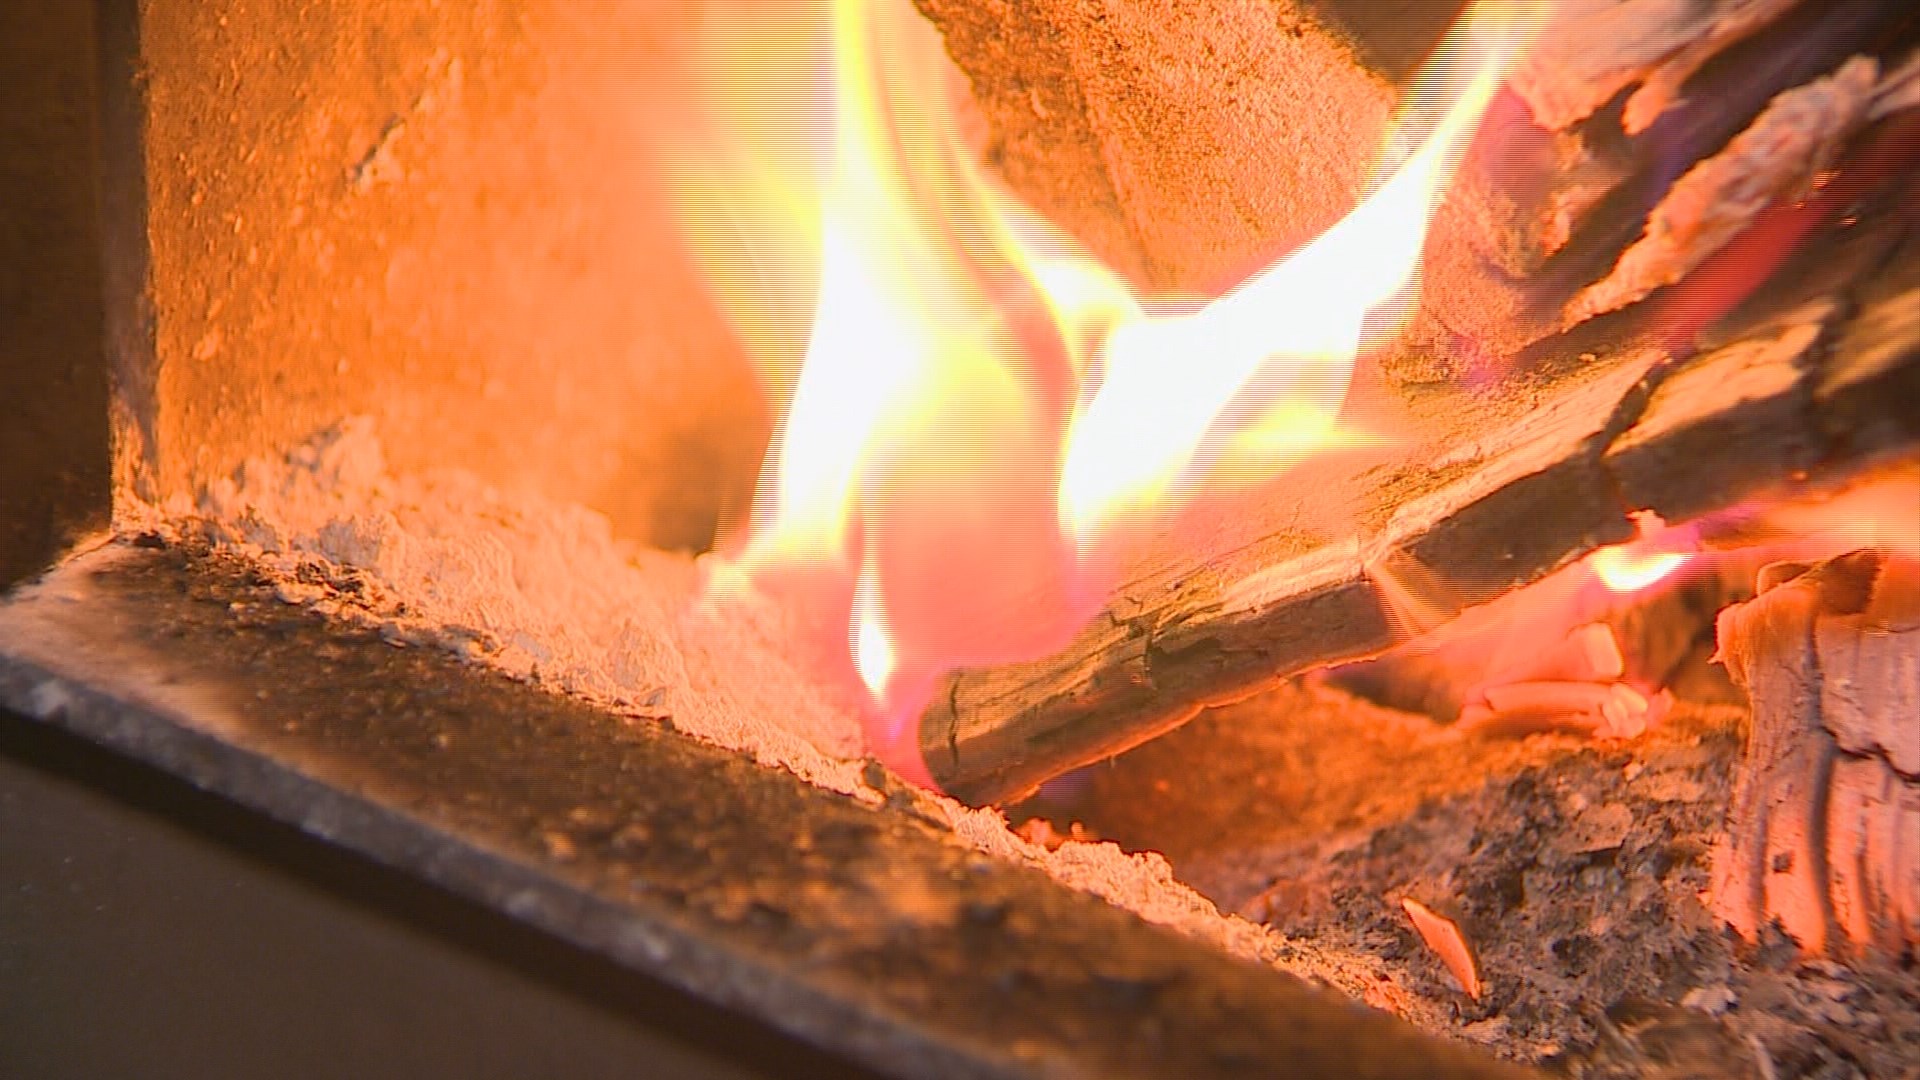 Pierce County's wood stove ban takes effect Oct. 1